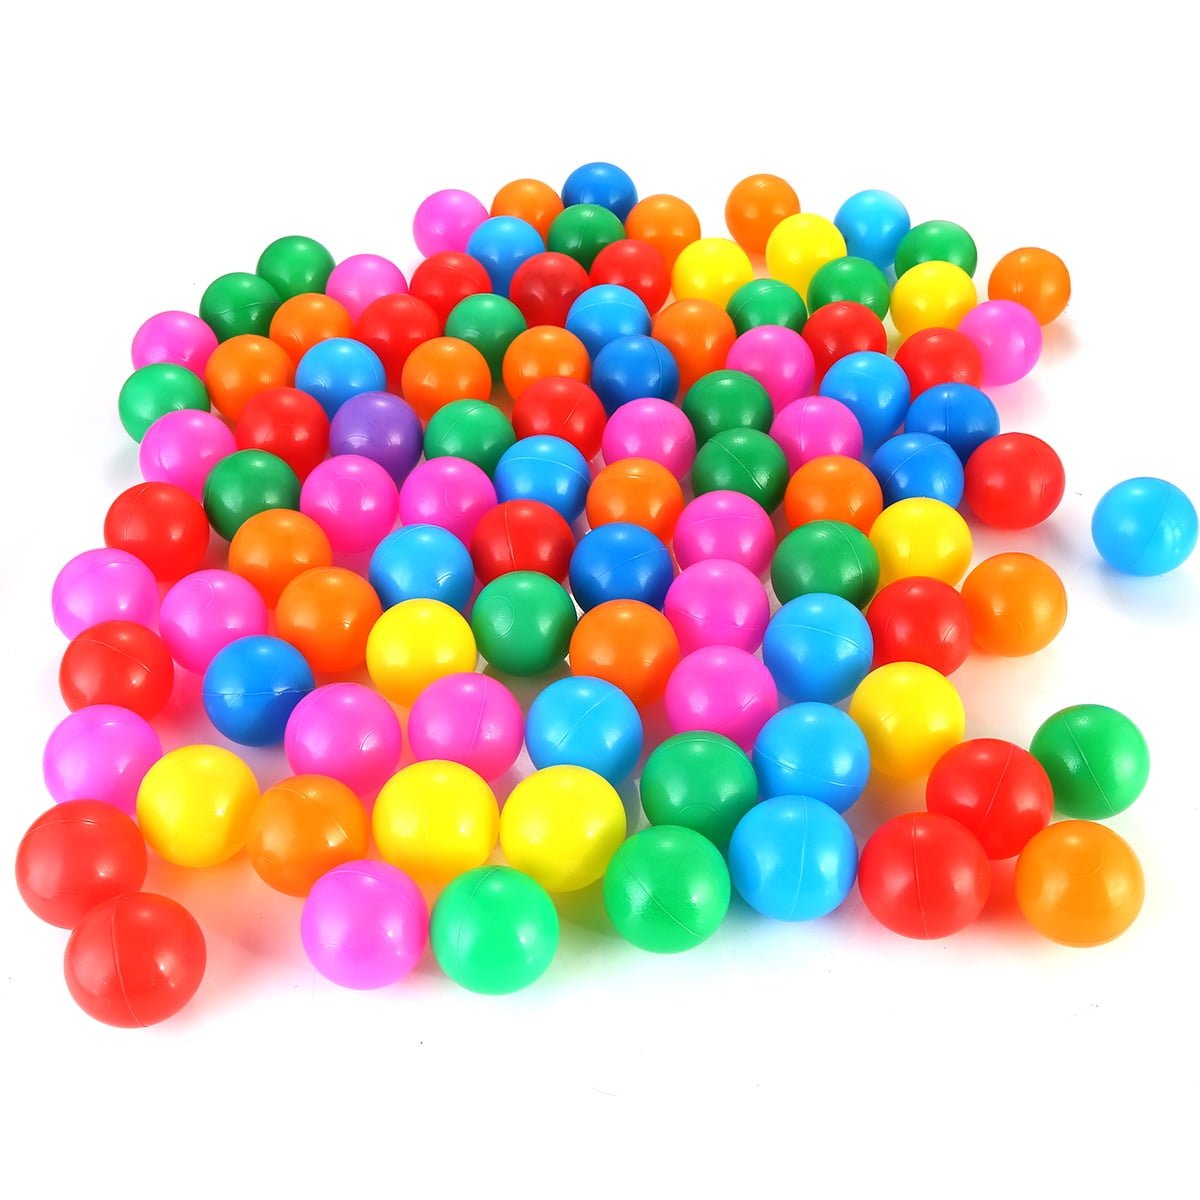 Baby Plastic Ball Toy Toys Pit Ocean BPA Colorful 100pcs Kids Fun Balls for sale online 